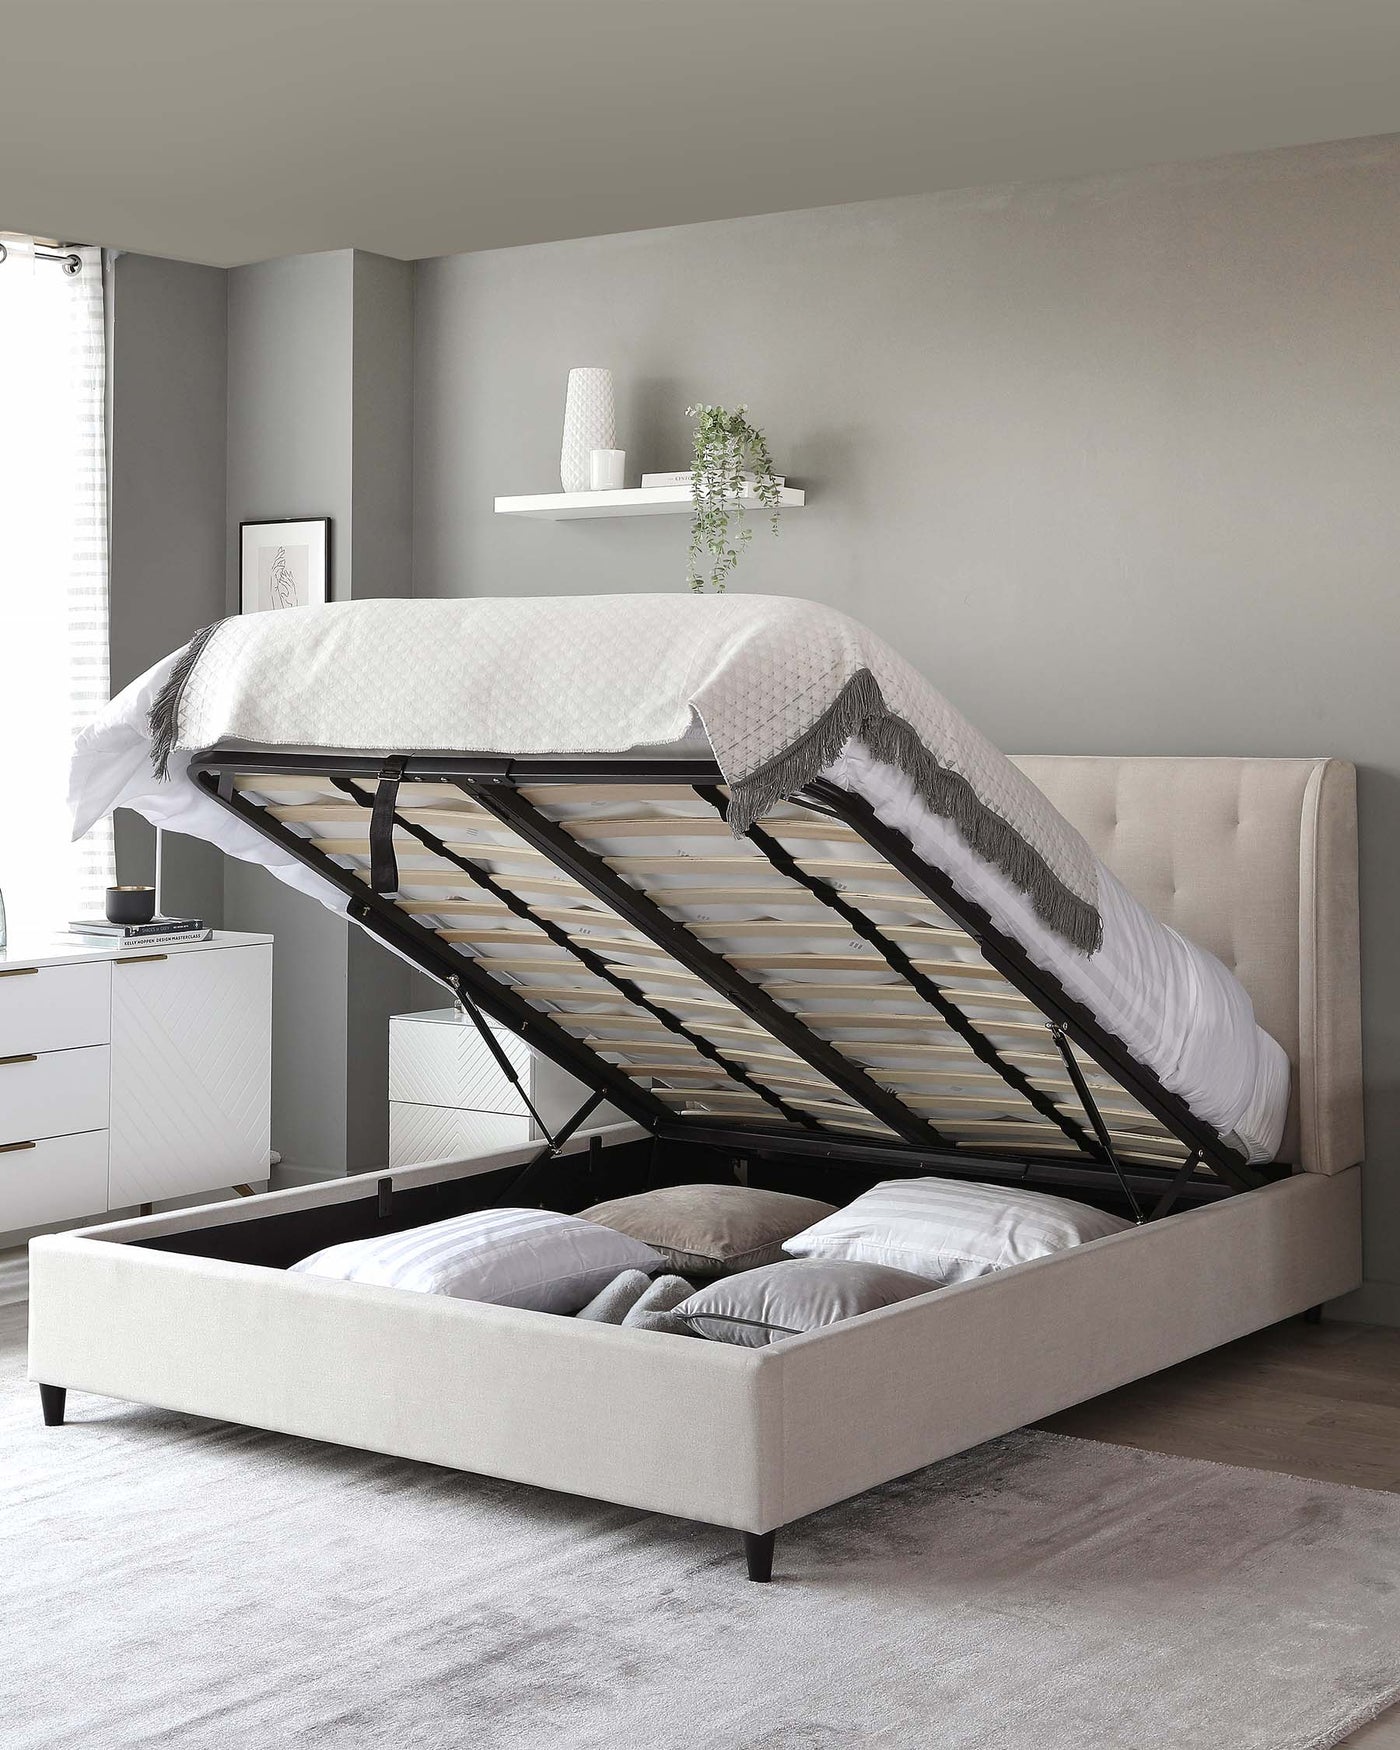 A contemporary upholstered bed frame with a lift-up storage system, showcasing a neutral fabric finish and a tufted headboard design. Slatted bed base is visible in an elevated position, revealing organized bedding storage below. A matching modern white bedside cabinet with a unique geometric pattern and a floating white shelf adorn the minimalist room.